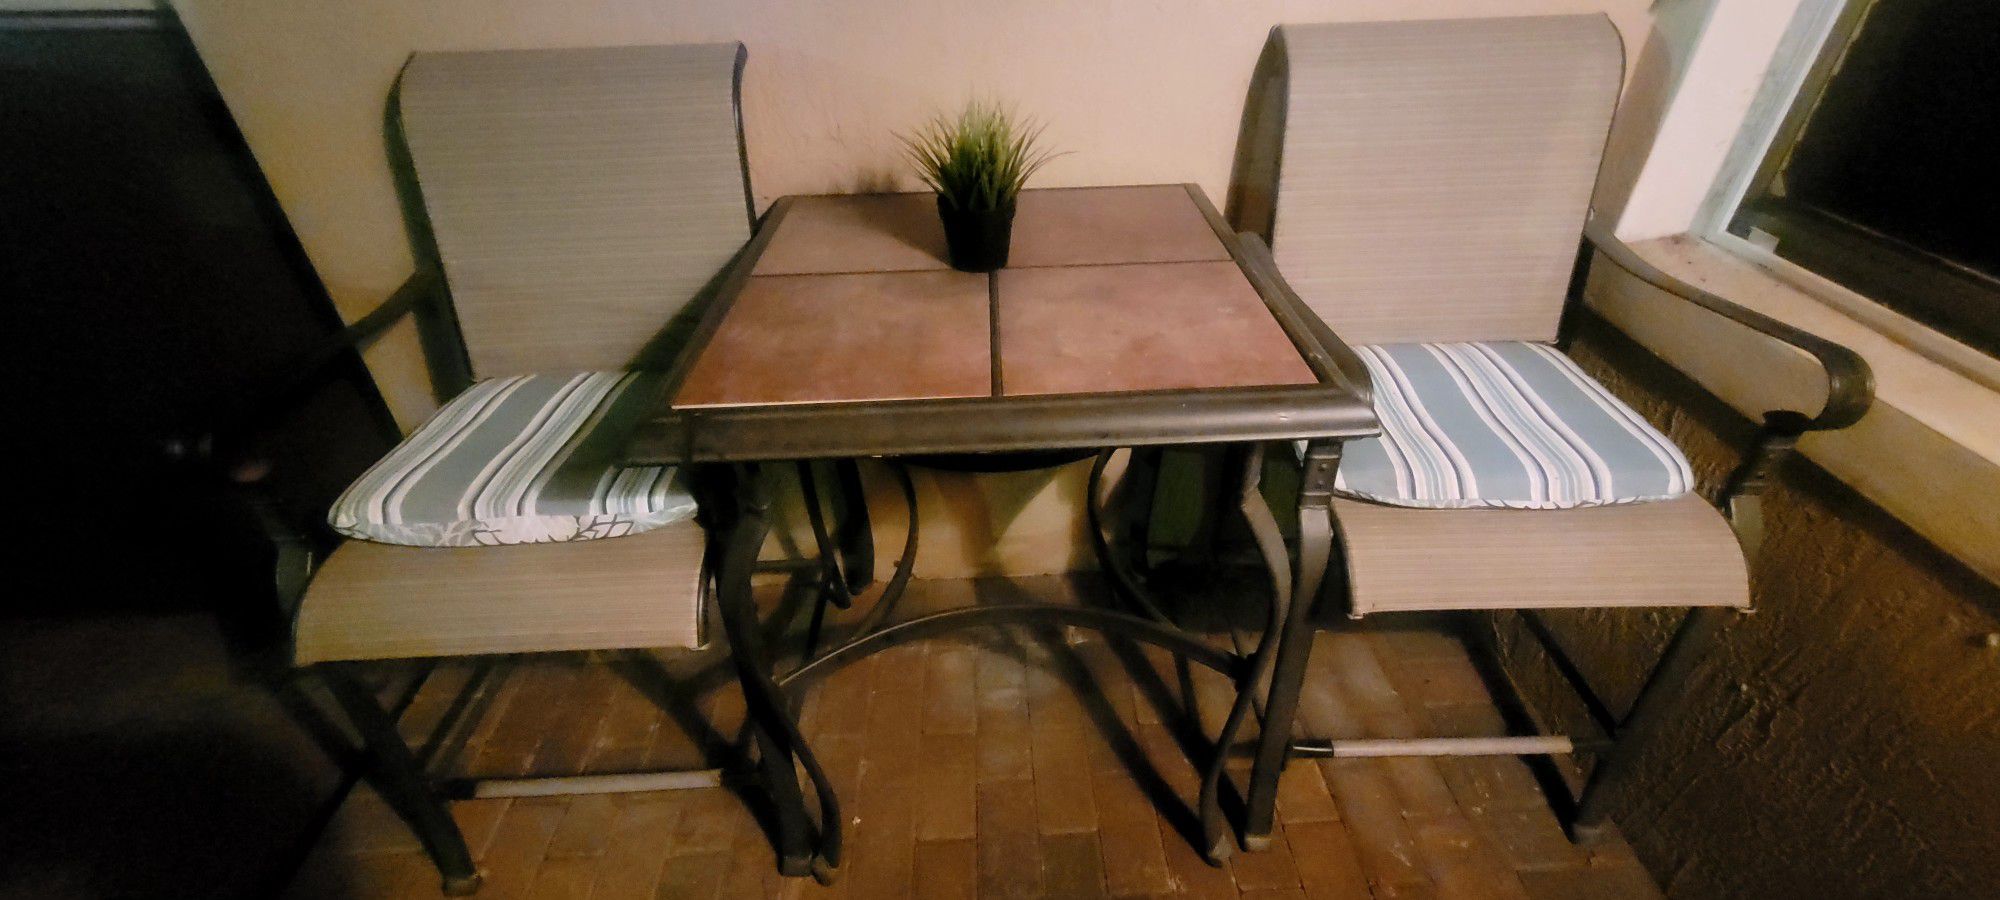 PRICE REDUCED! High Top Outdoor Table With Two Chairs!